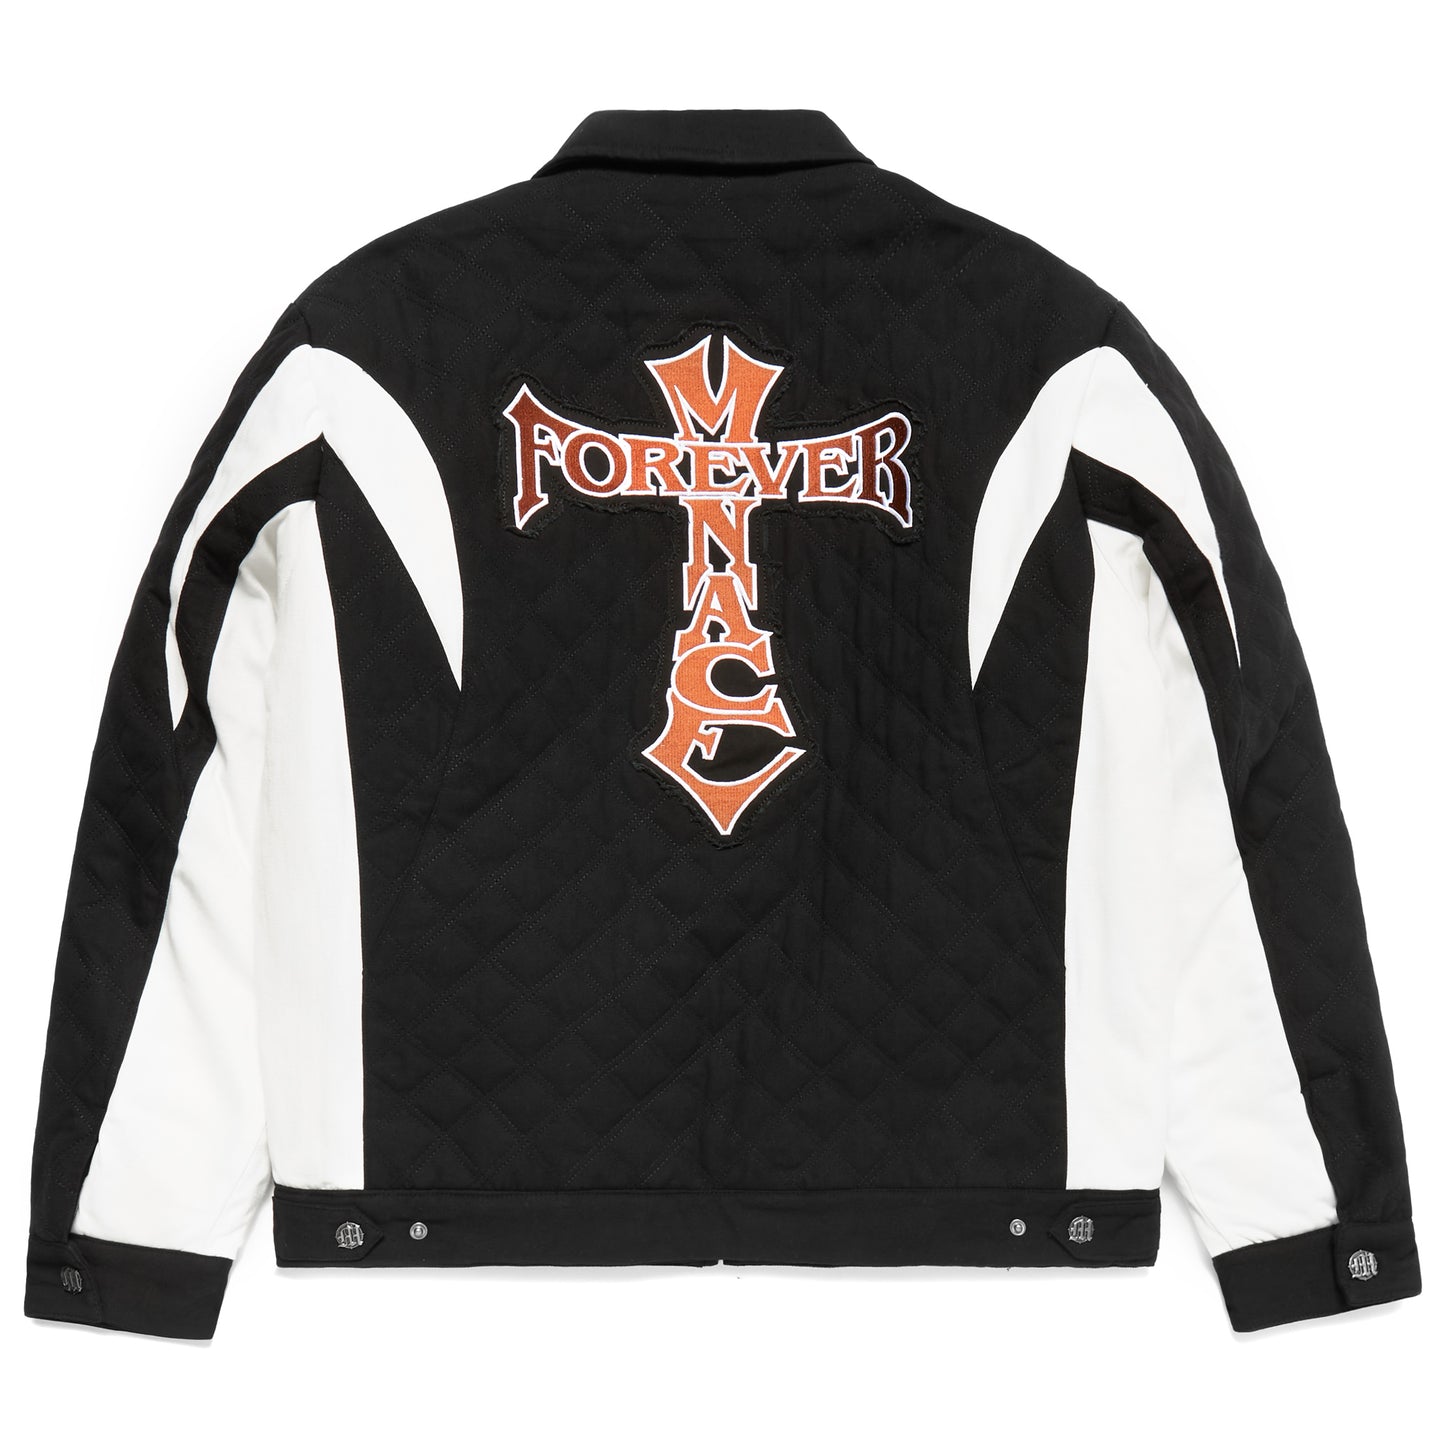 MENACE FOREVER QUILTED TWO-TONE WORK JACKET